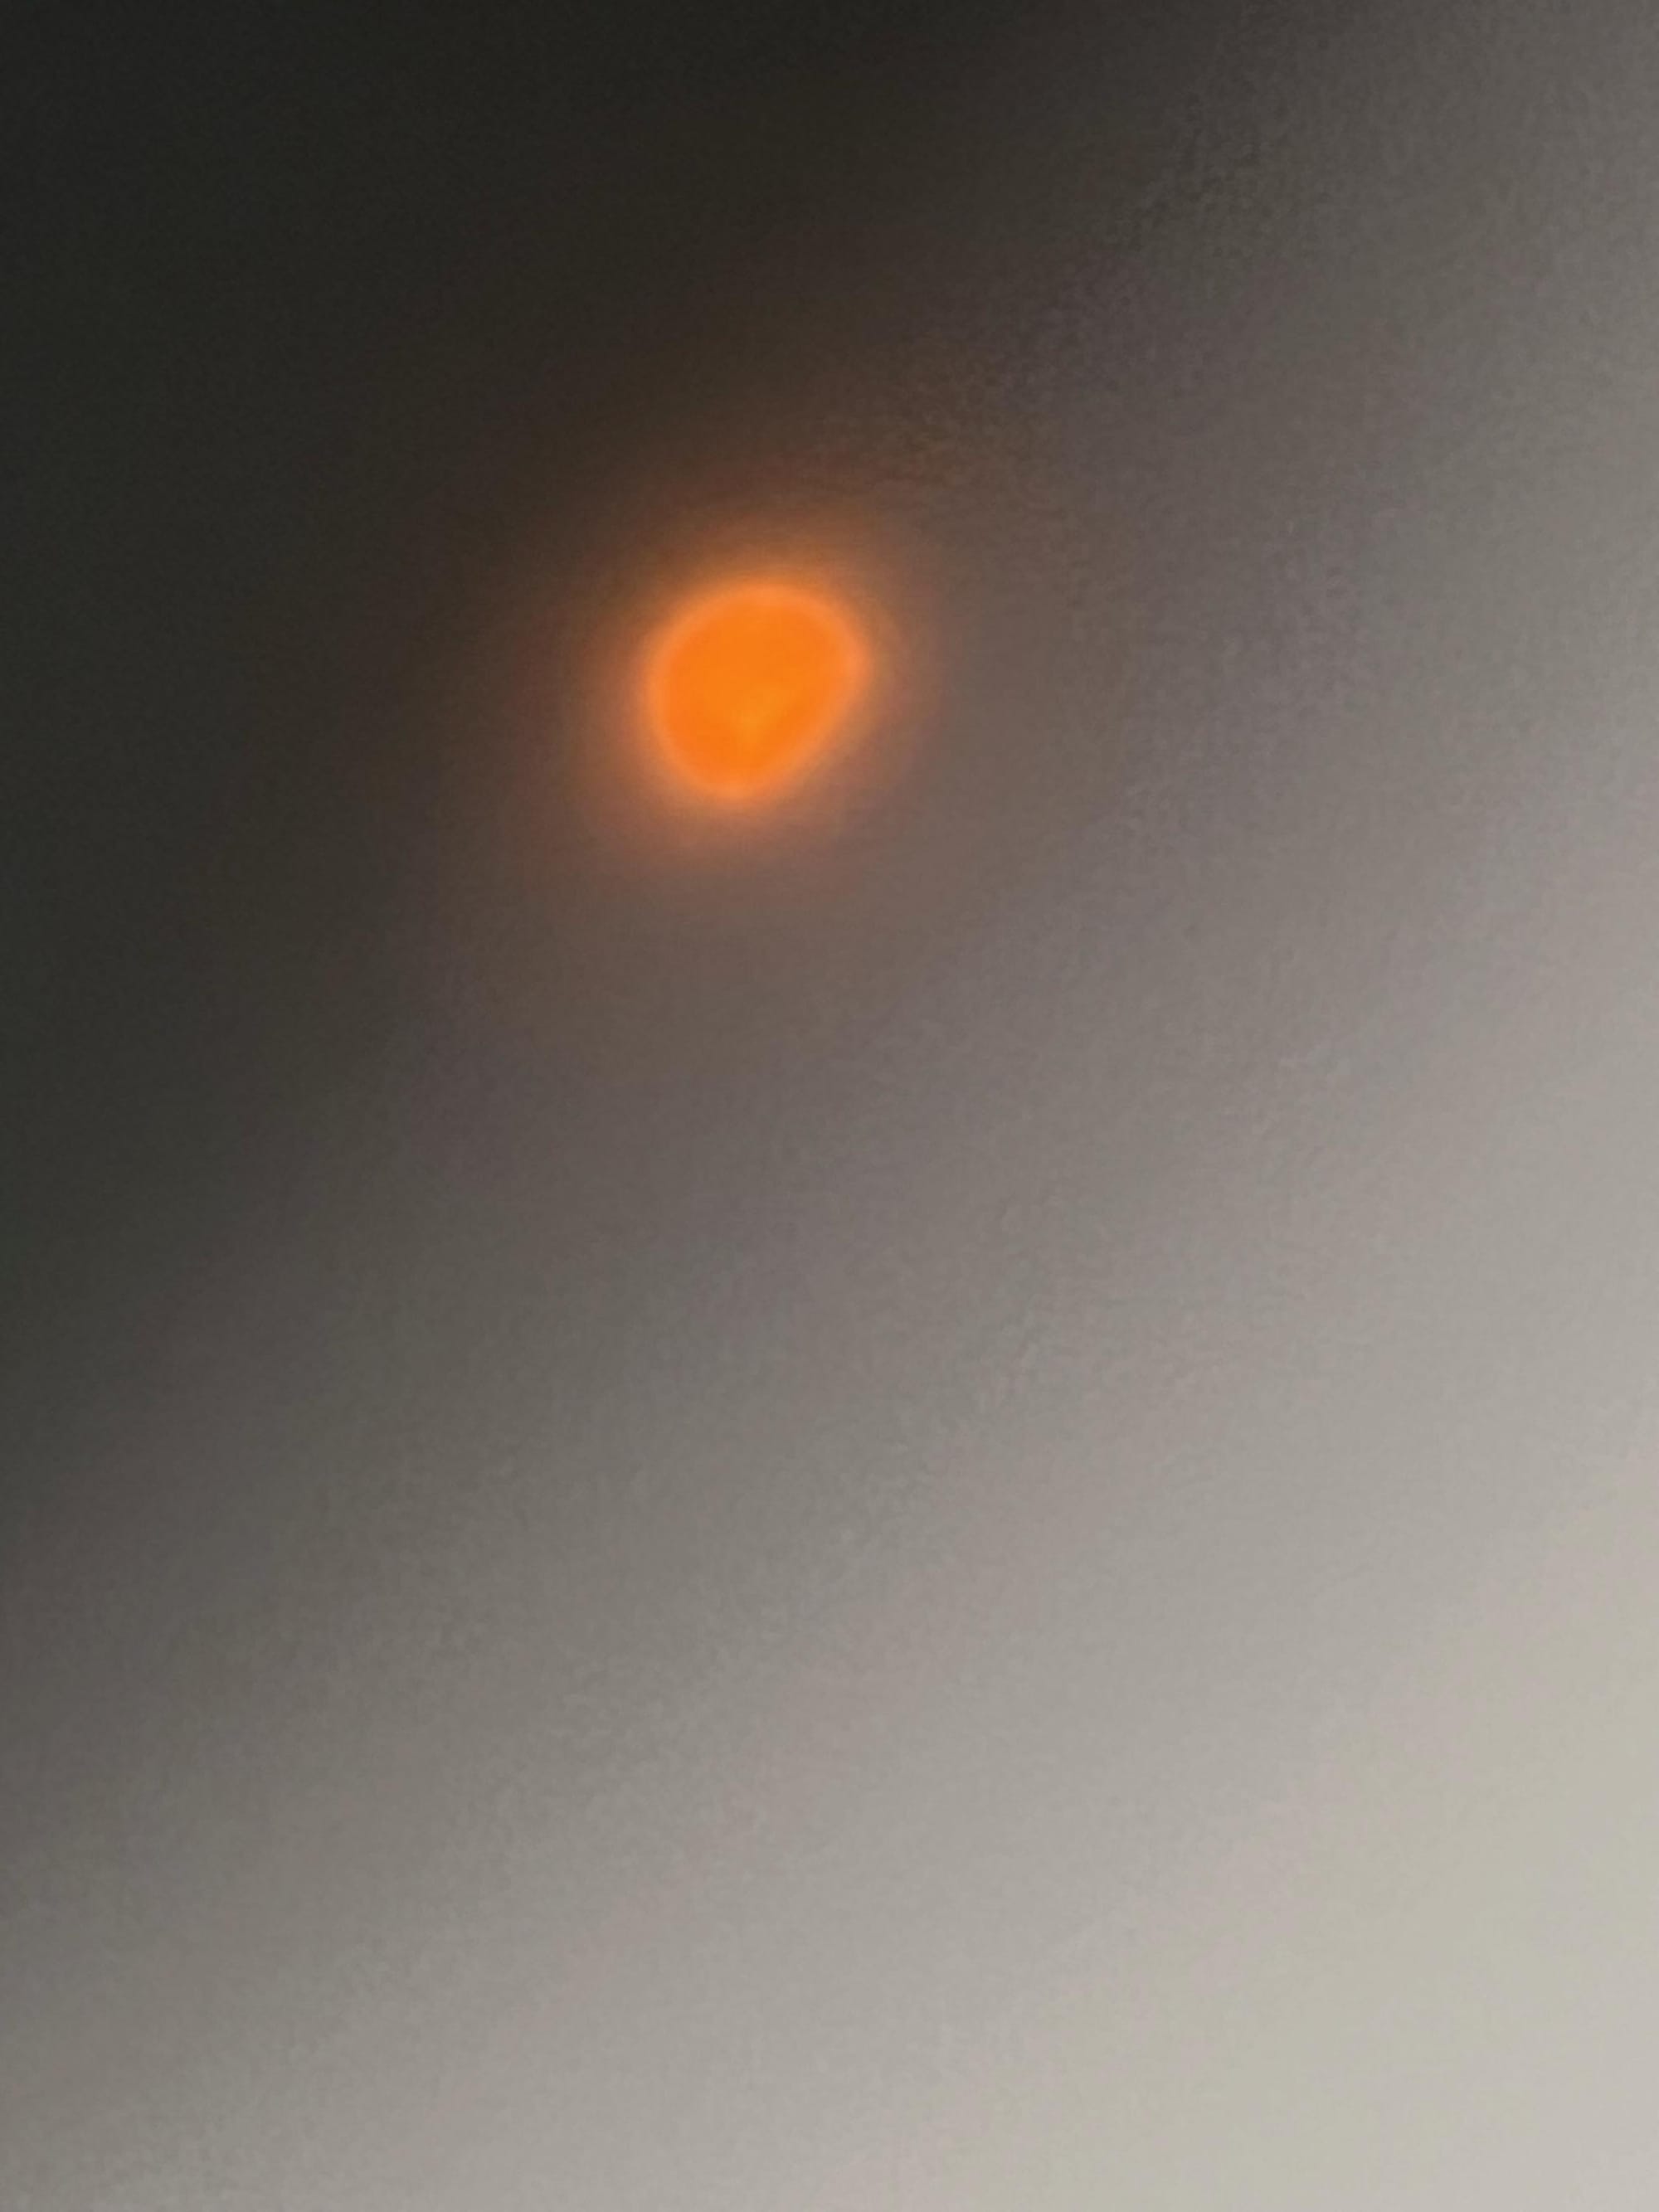 A blurry image of the beginning of the solar eclipse.